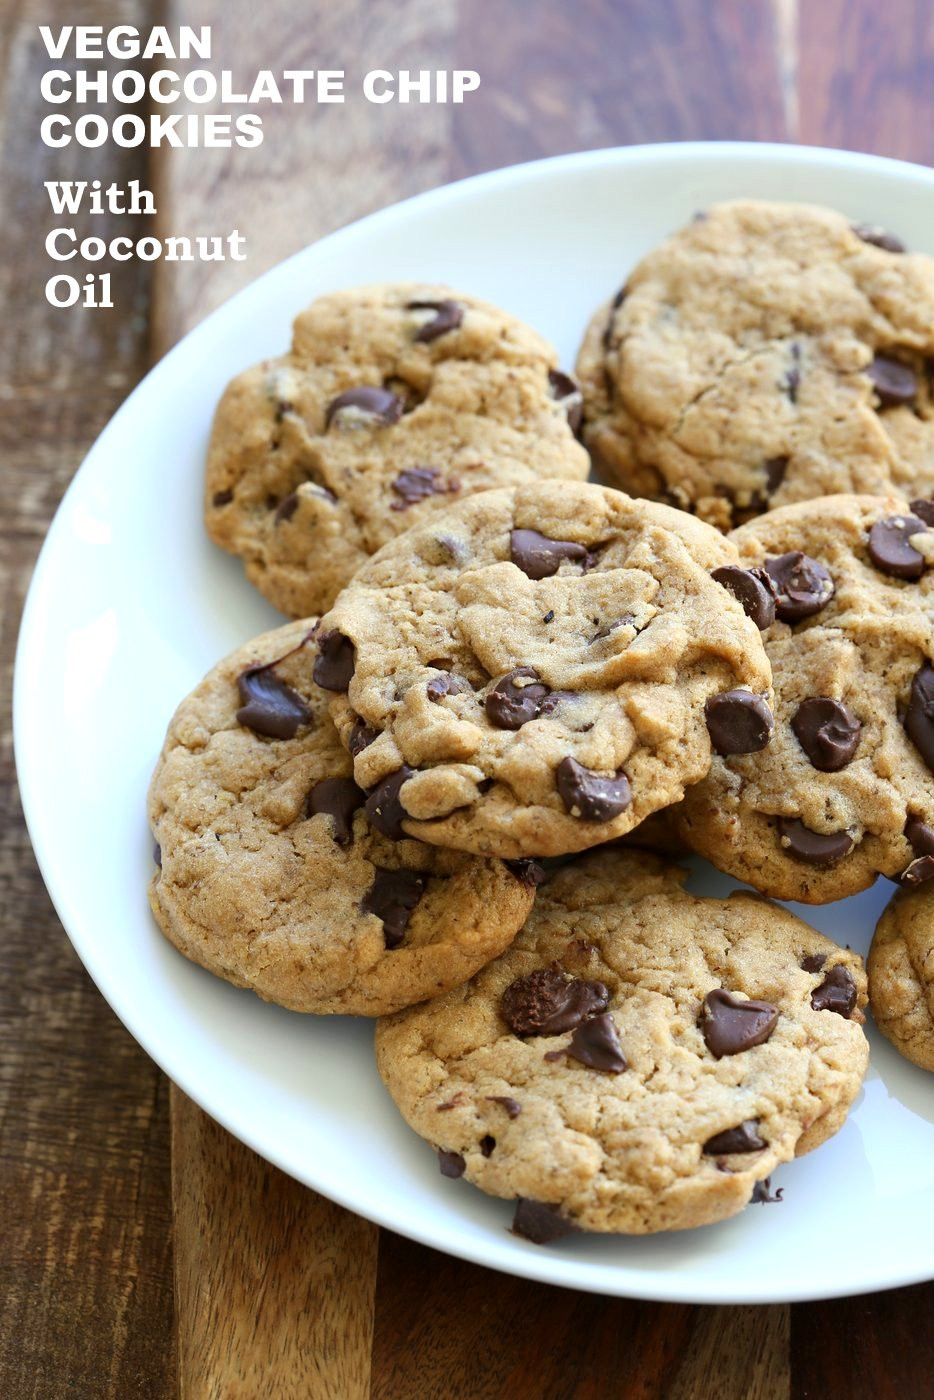 Vegan Gluten Free Cookie Recipes
 Vegan Chocolate Chip Cookies with Coconut Oil Palm Oil